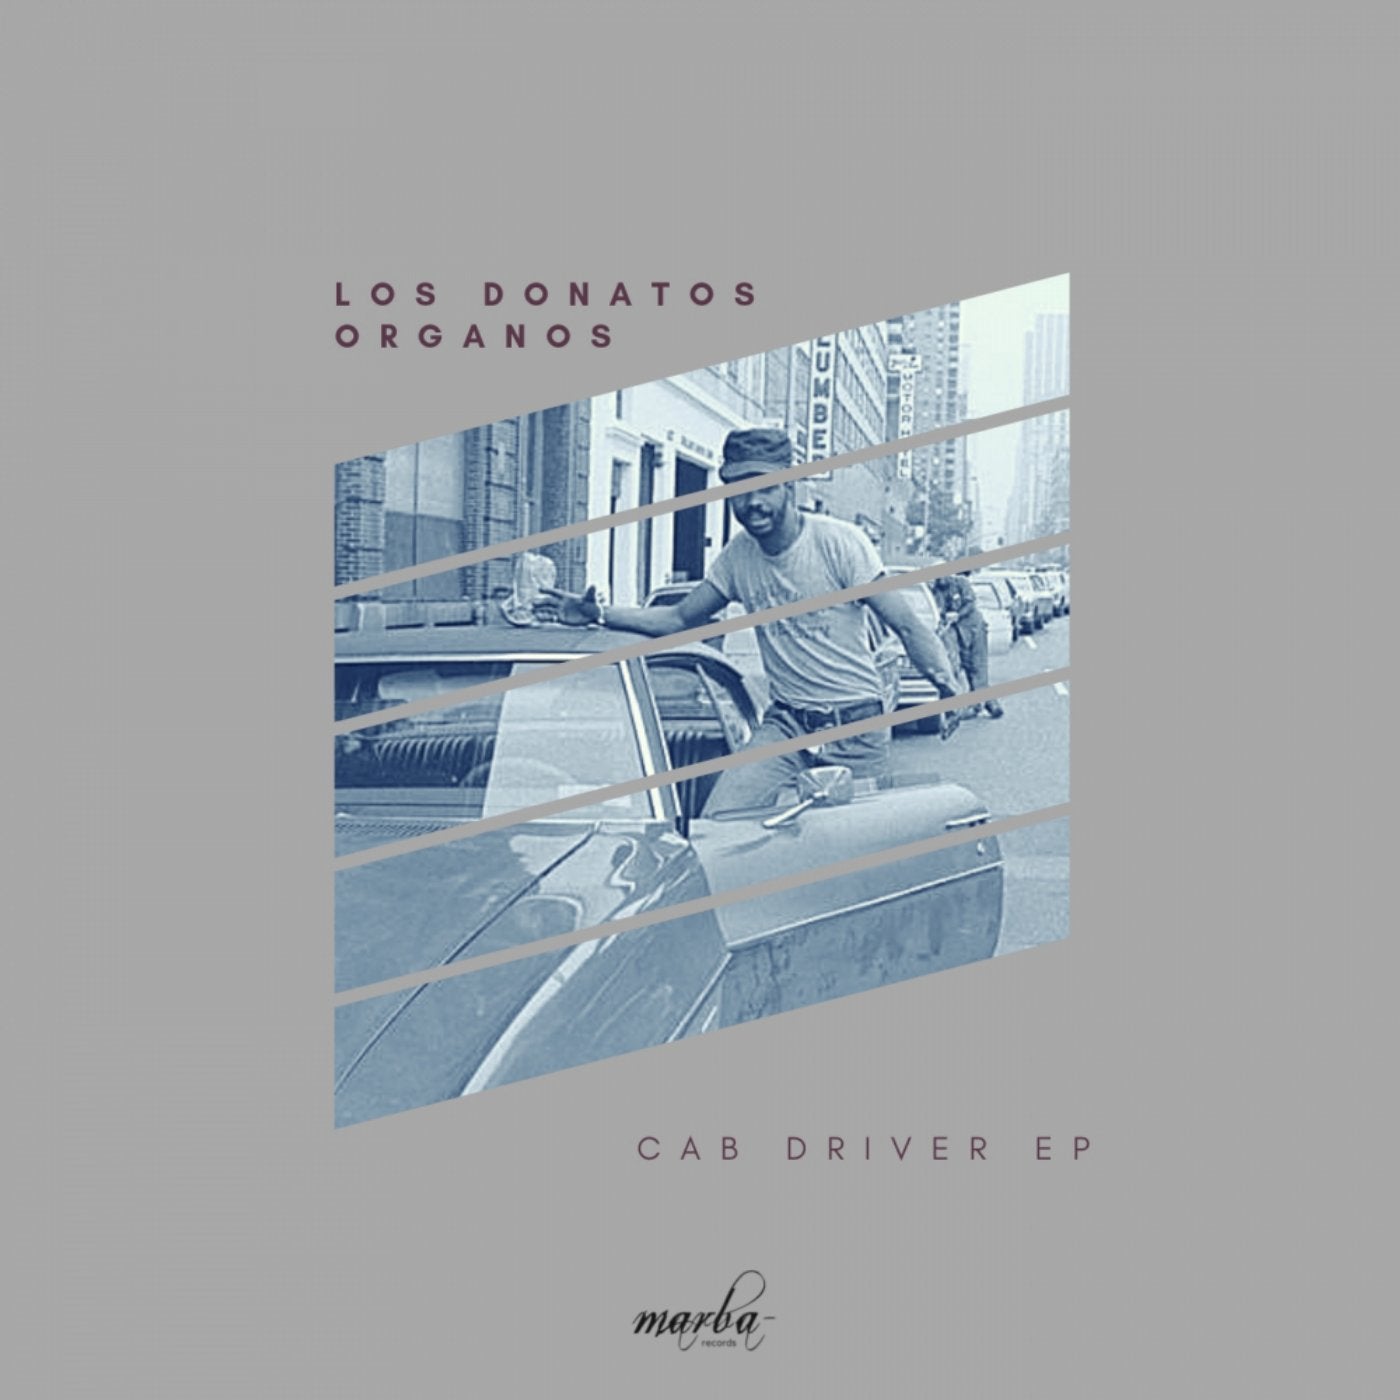 Cab Driver EP